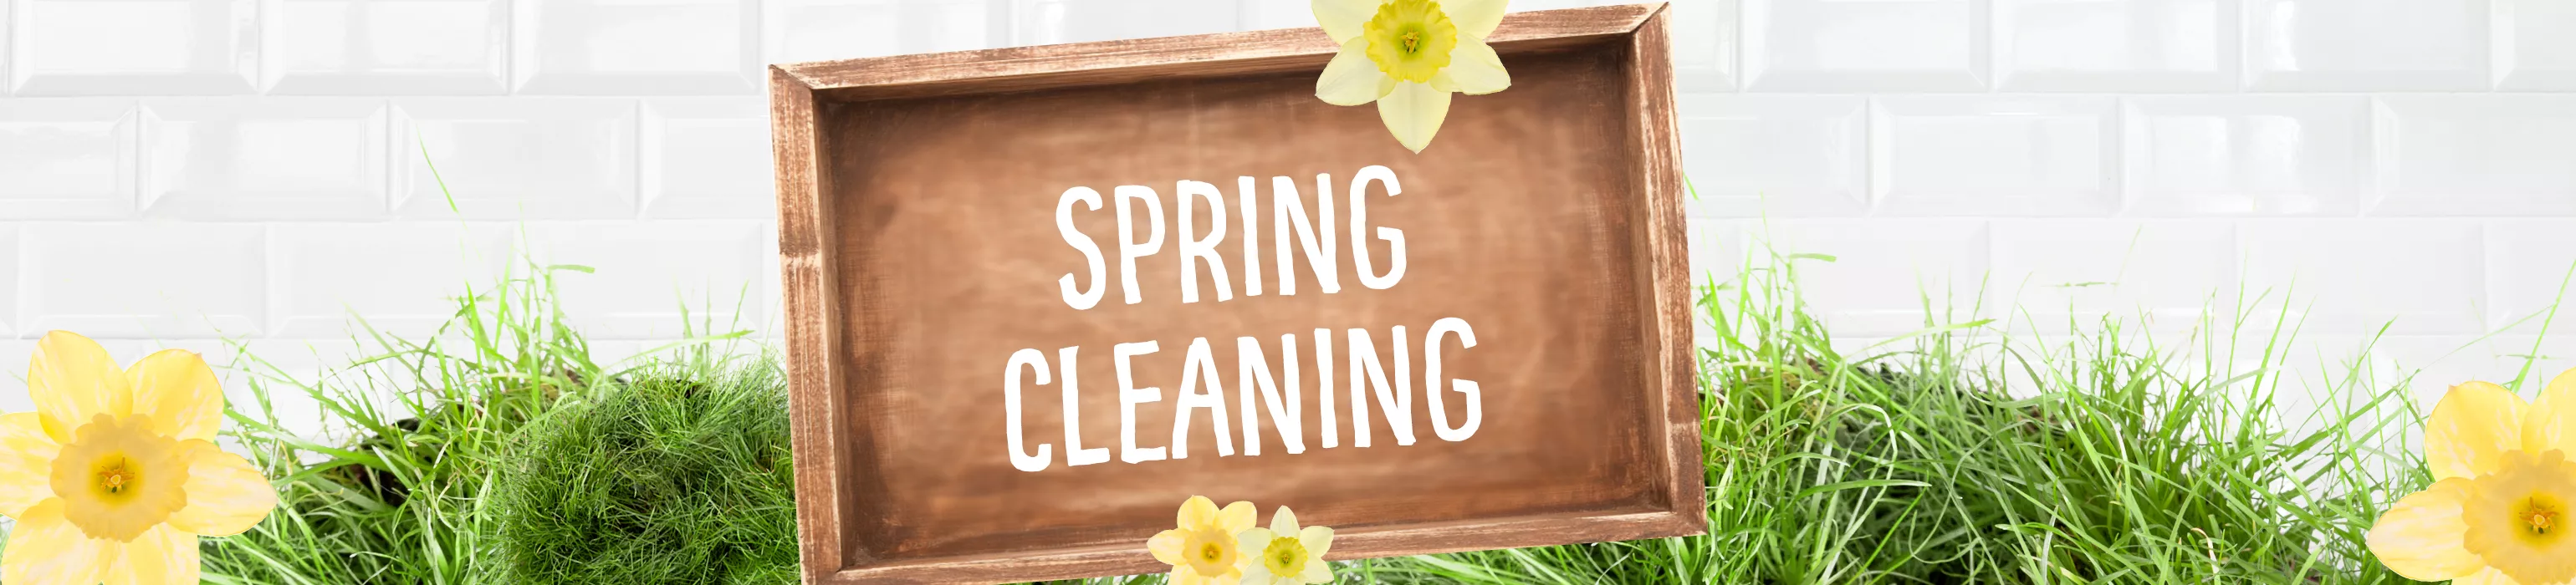 Spring Cleaning Savings on now